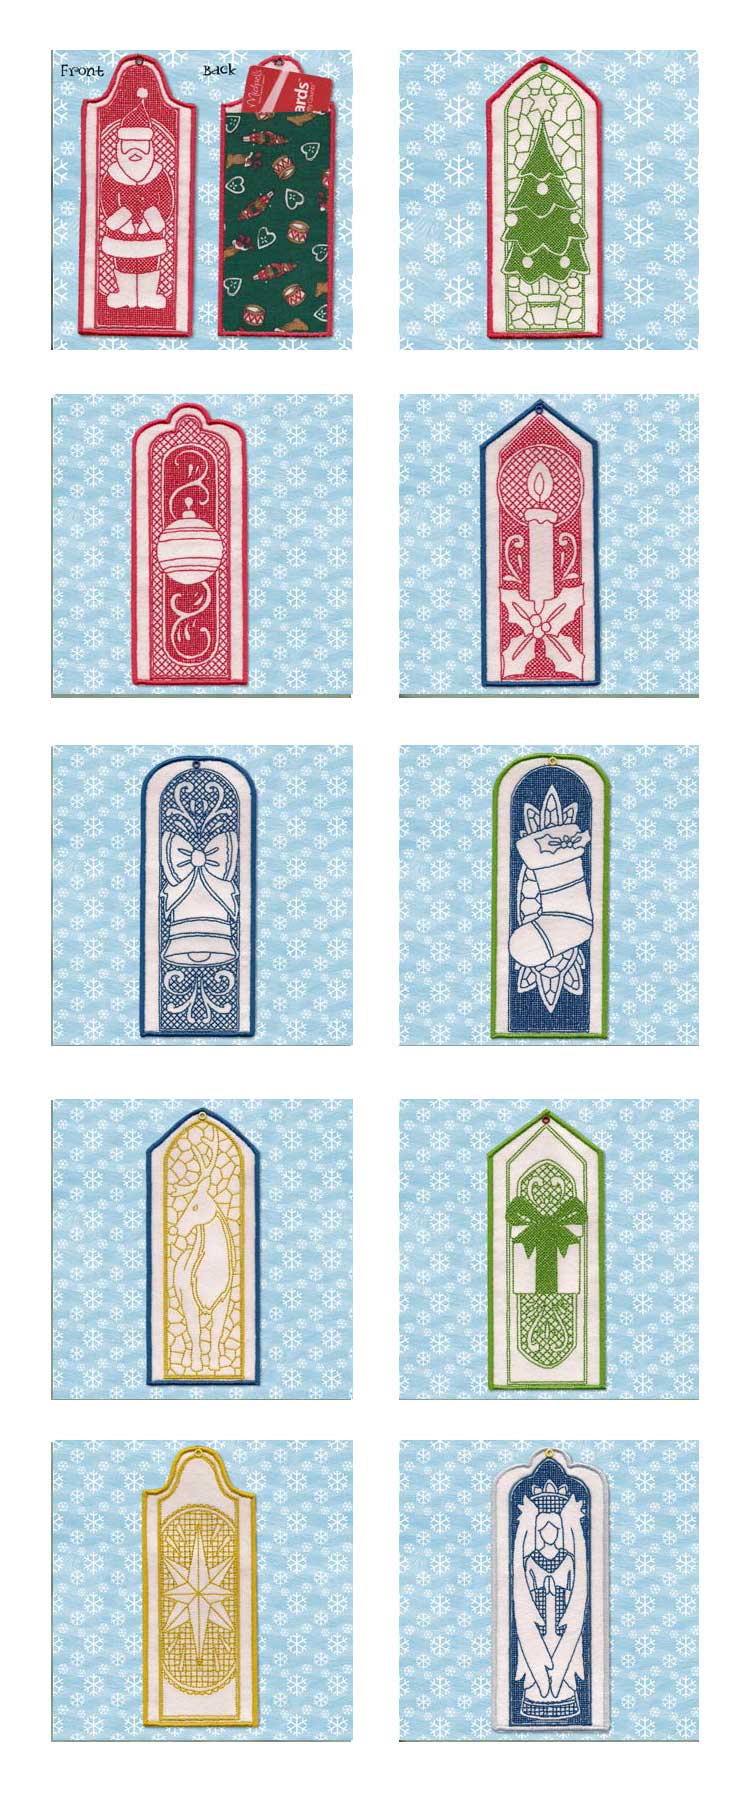 ITH Christmas Bookmarks and Gift Card Holders Embroidery Machine Design Details